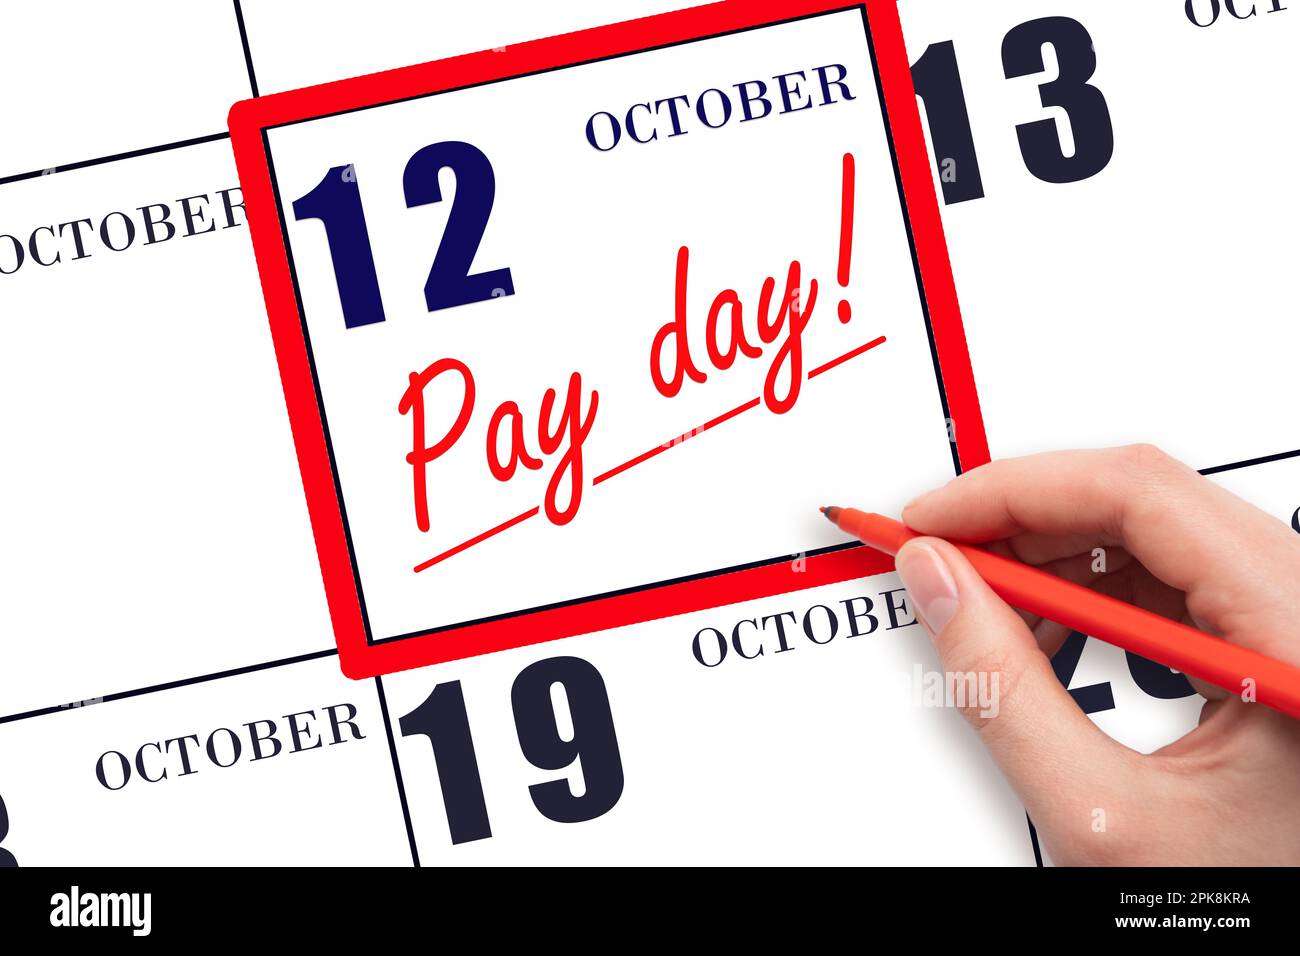 12th day of October. Hand writing text PAY DATE on calendar date October 12 and underline it. Payment due date. Reminder concept of payment. Autumn mo Stock Photo